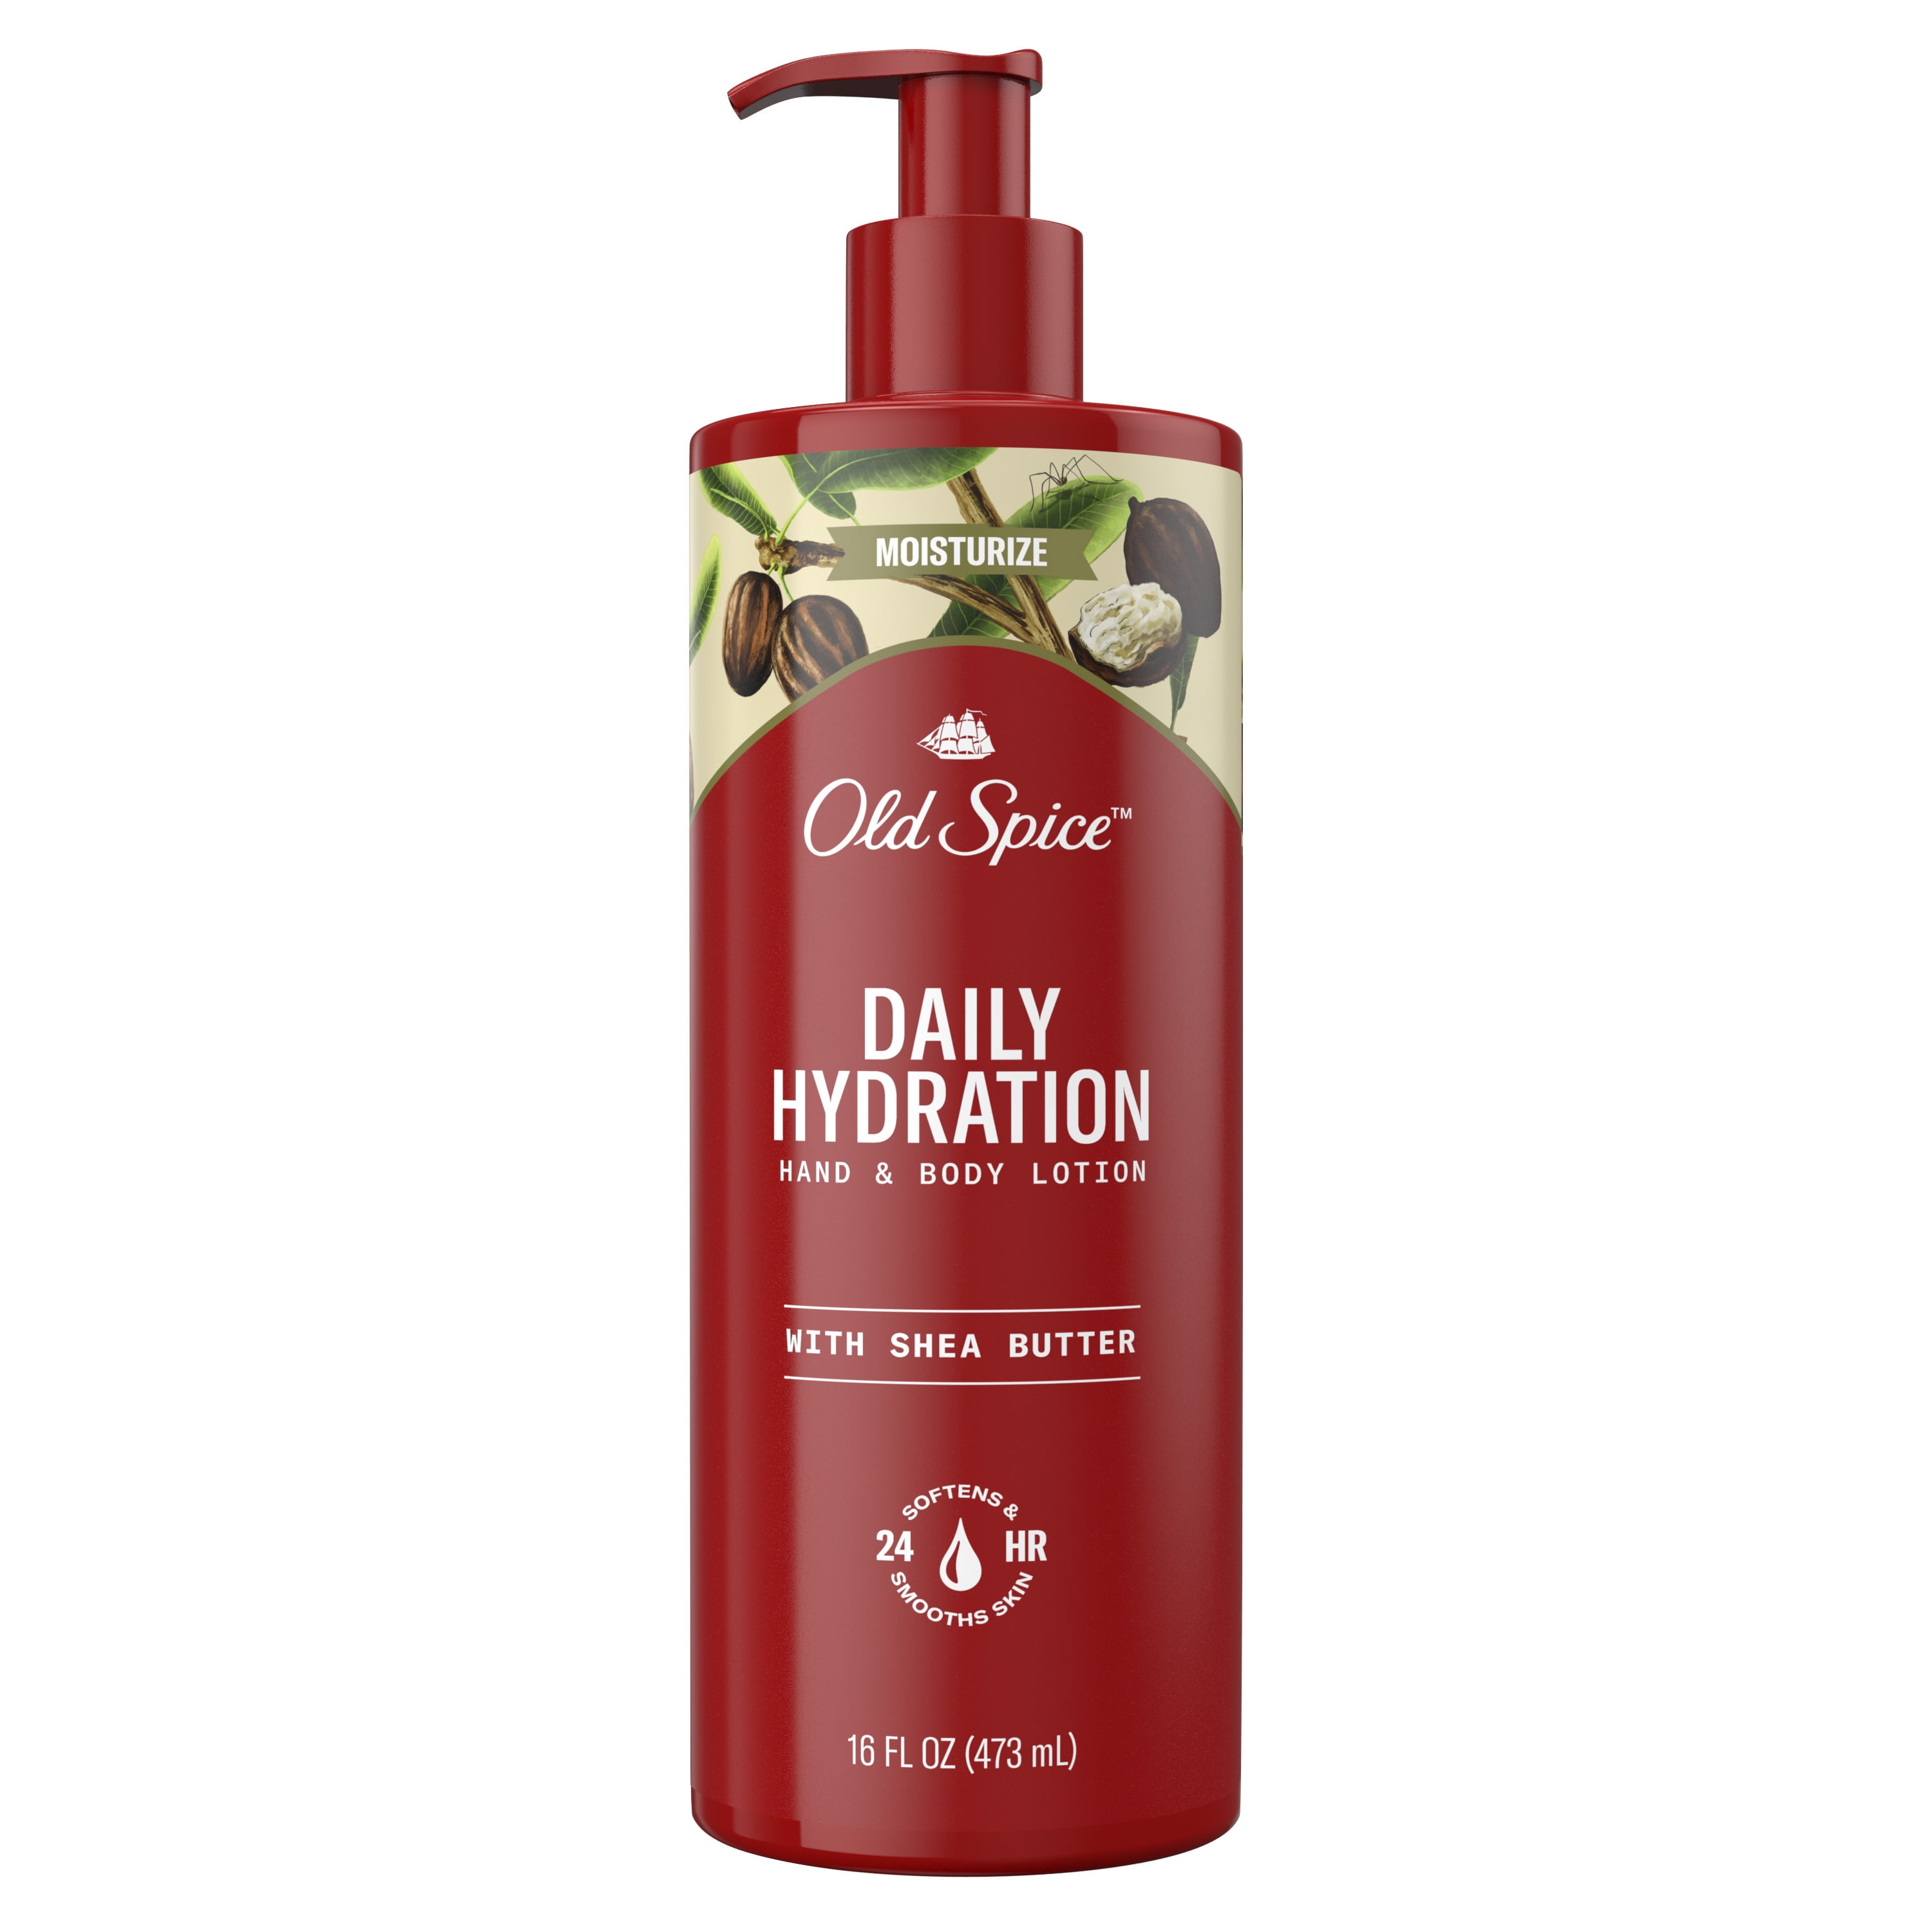 Spice Daily Hydration Hand & Body Lotion for Men with Shea Butter, 16.0 fl oz - Walmart.com